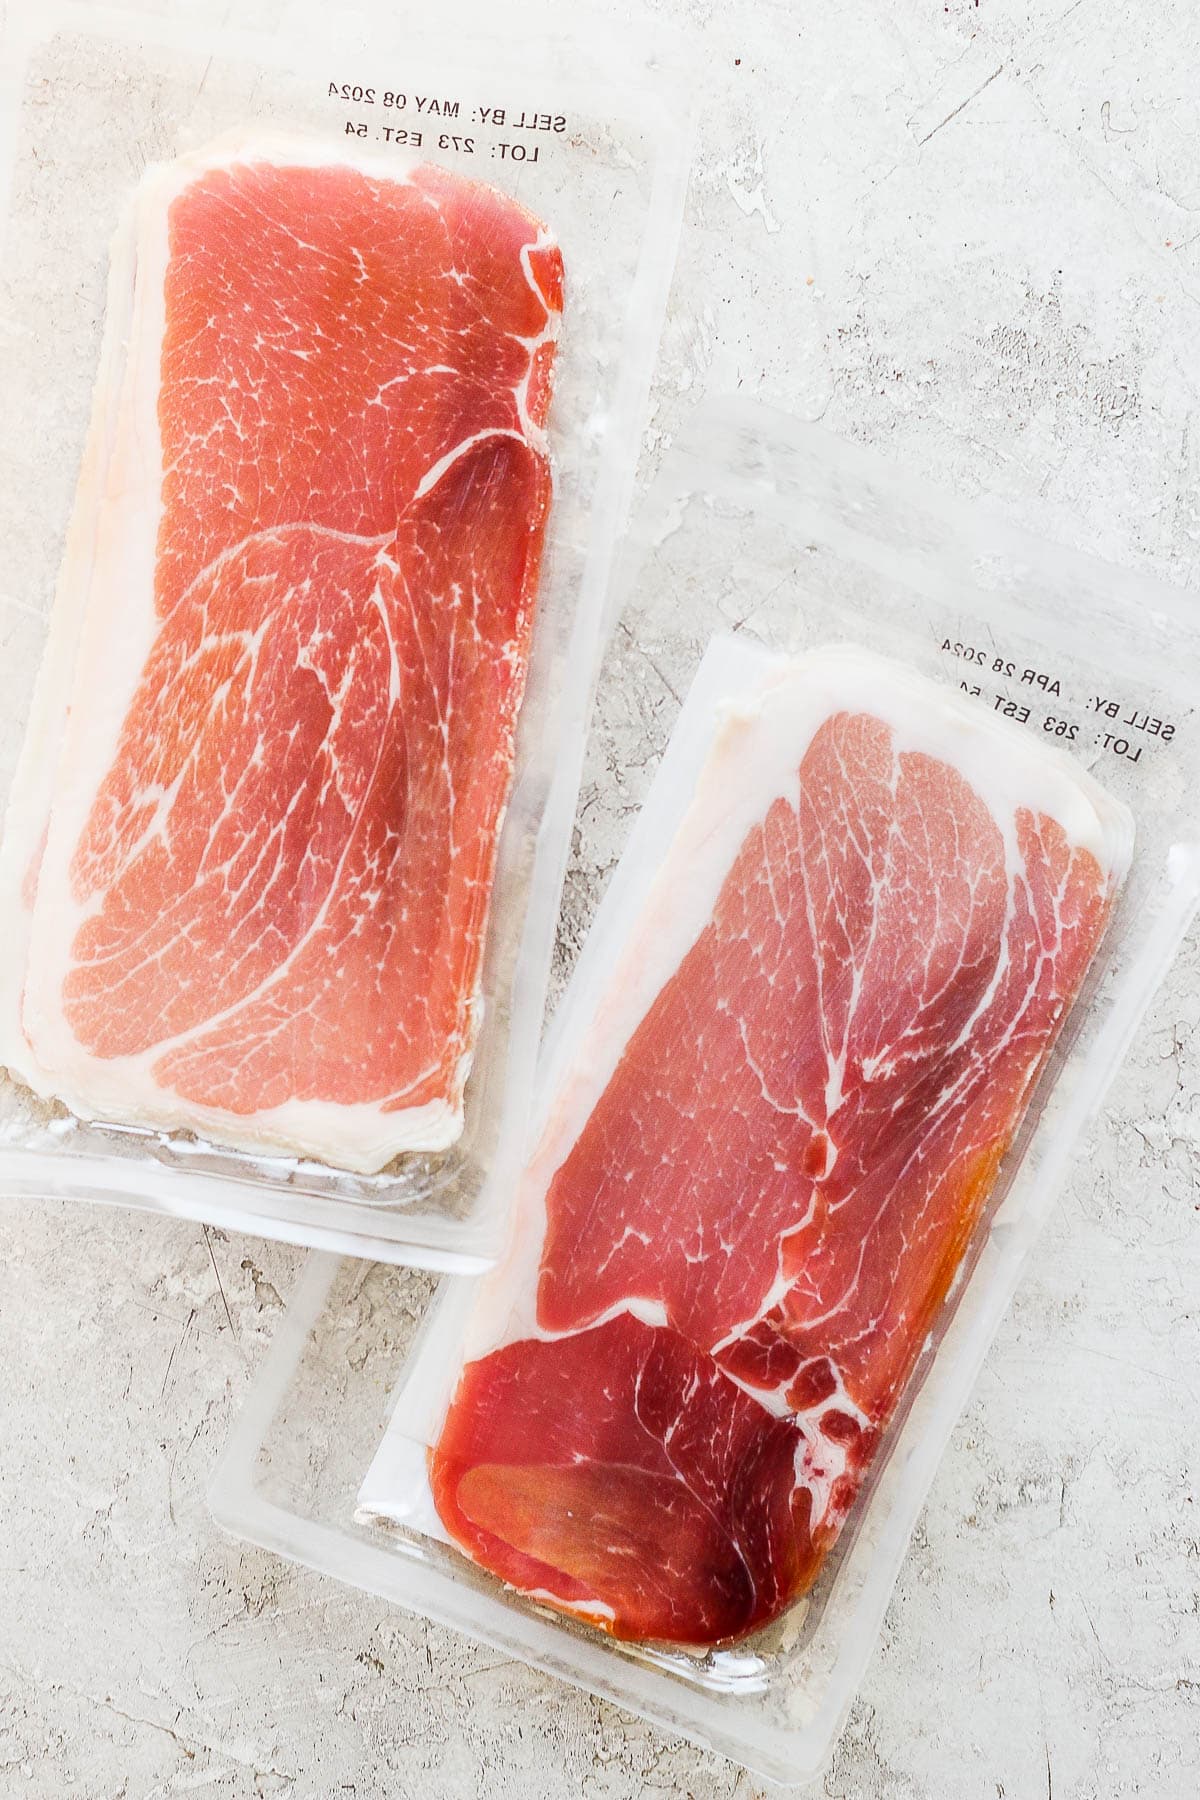 Two packages of prosciutto.